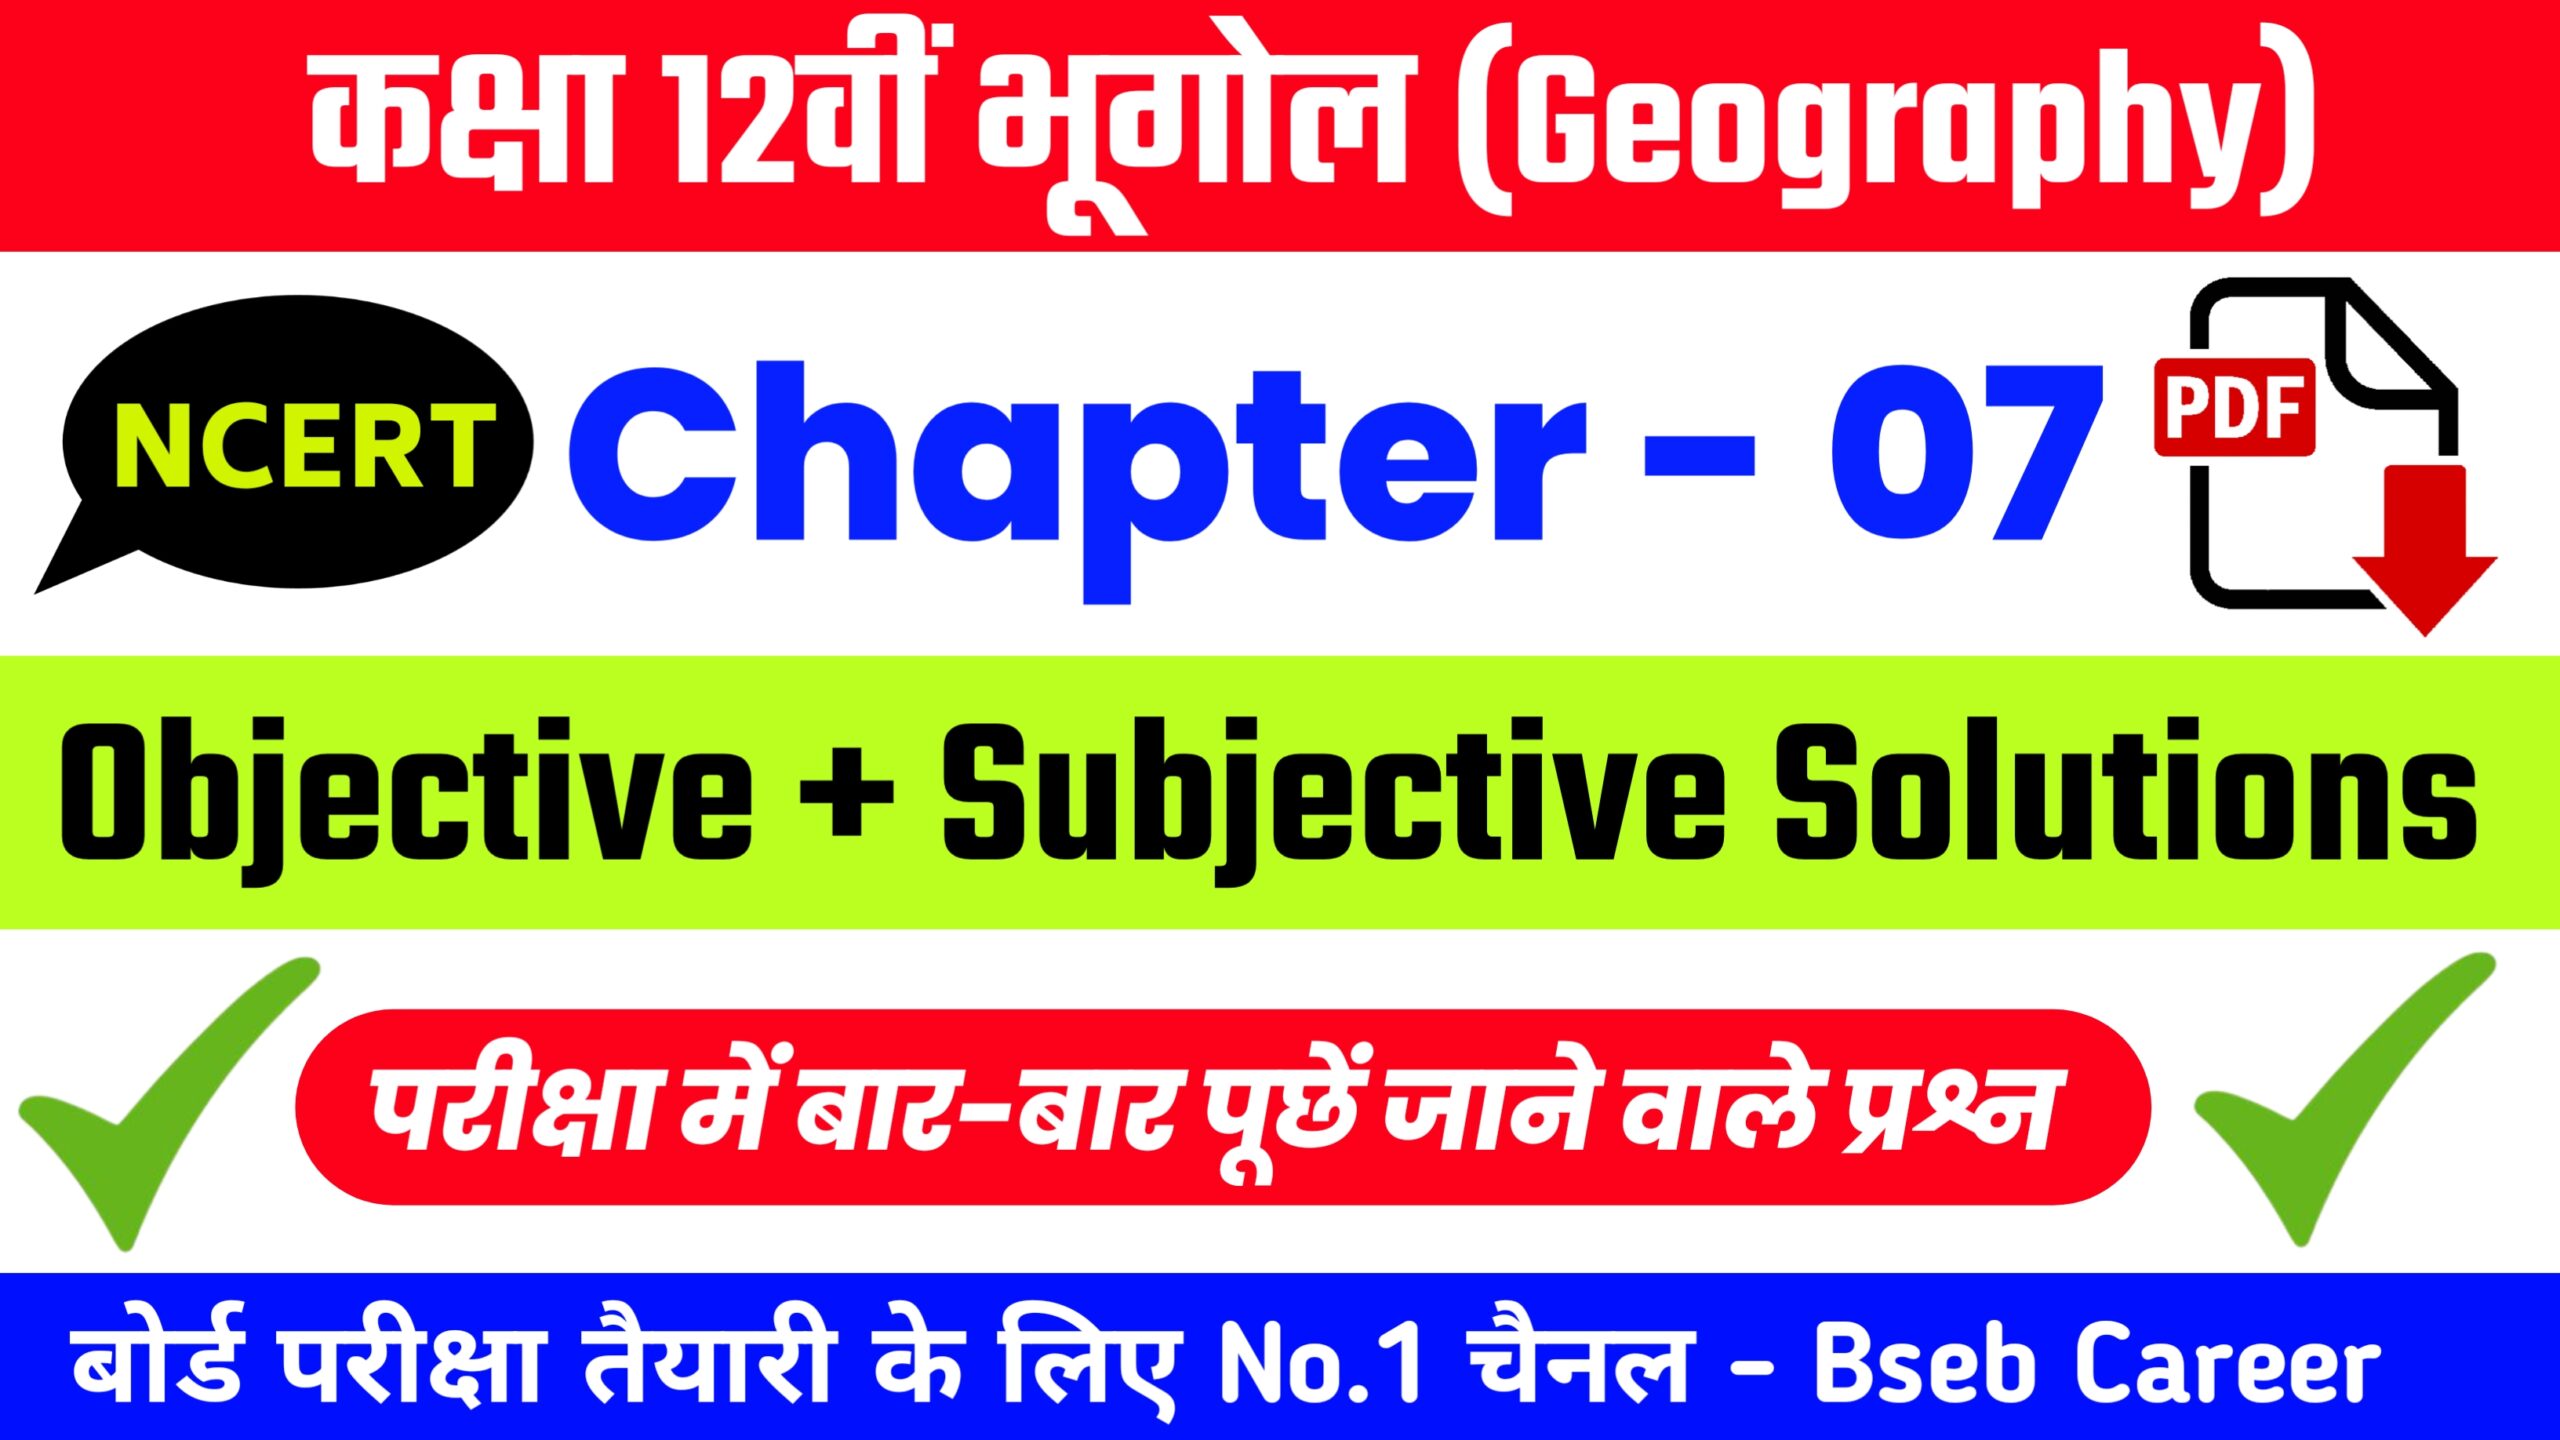 Class 12th Geography Chapter 7 Solutions In Hindi